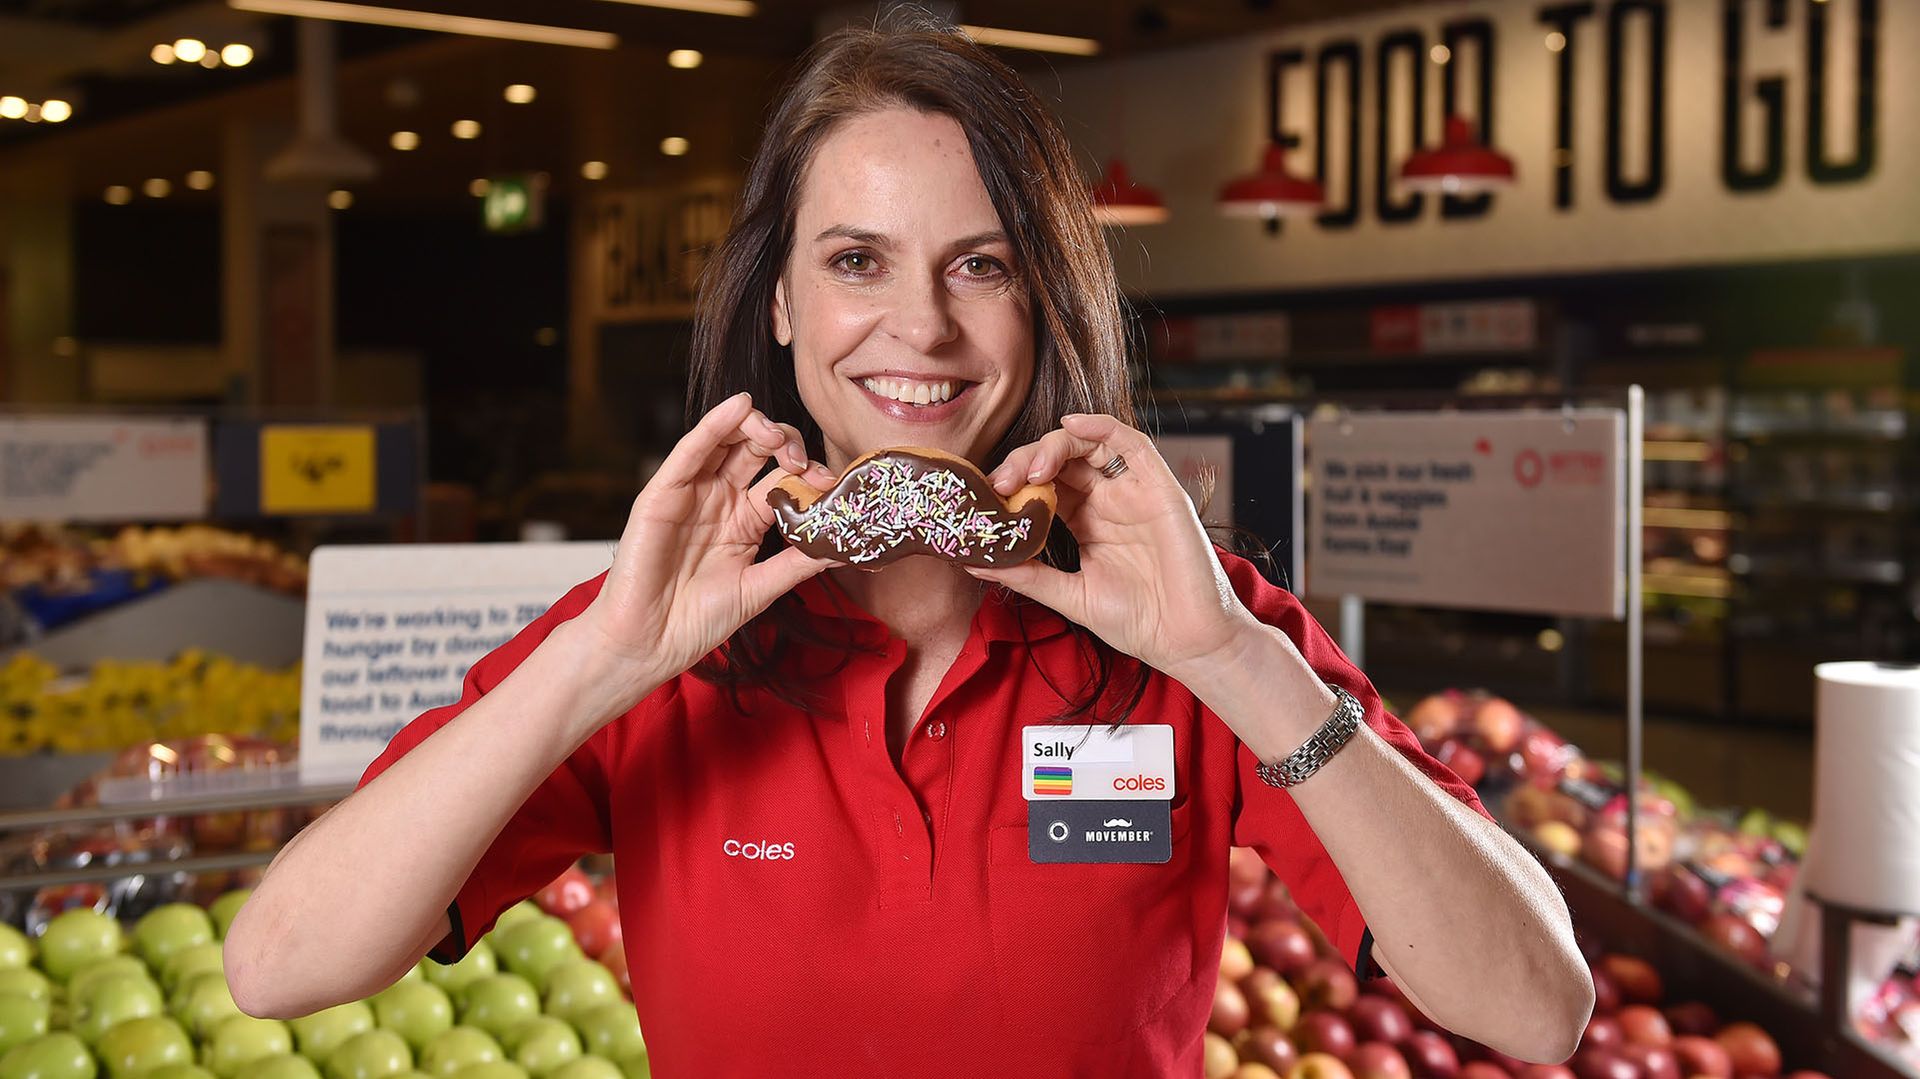 Photo of Coles employee smiling to camera, holding a moustache-shaped doughnut.